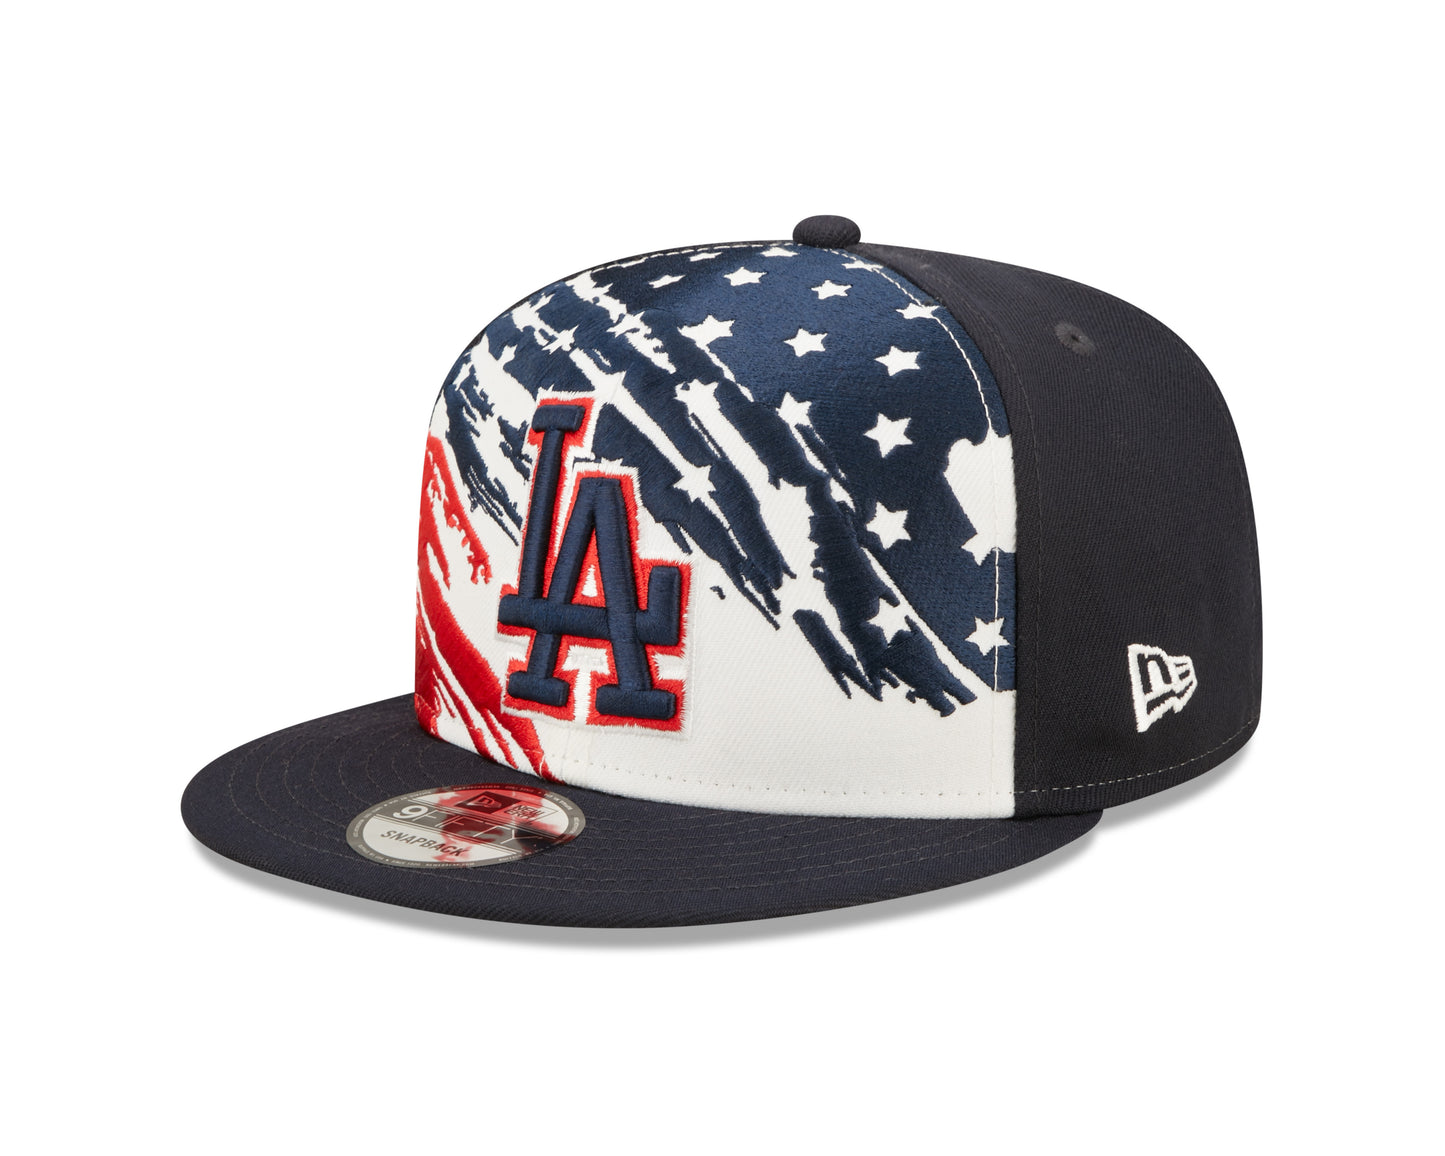 Los Angeles Dodgers Stars and Stripes July 4th 59fifty Fitted Hats